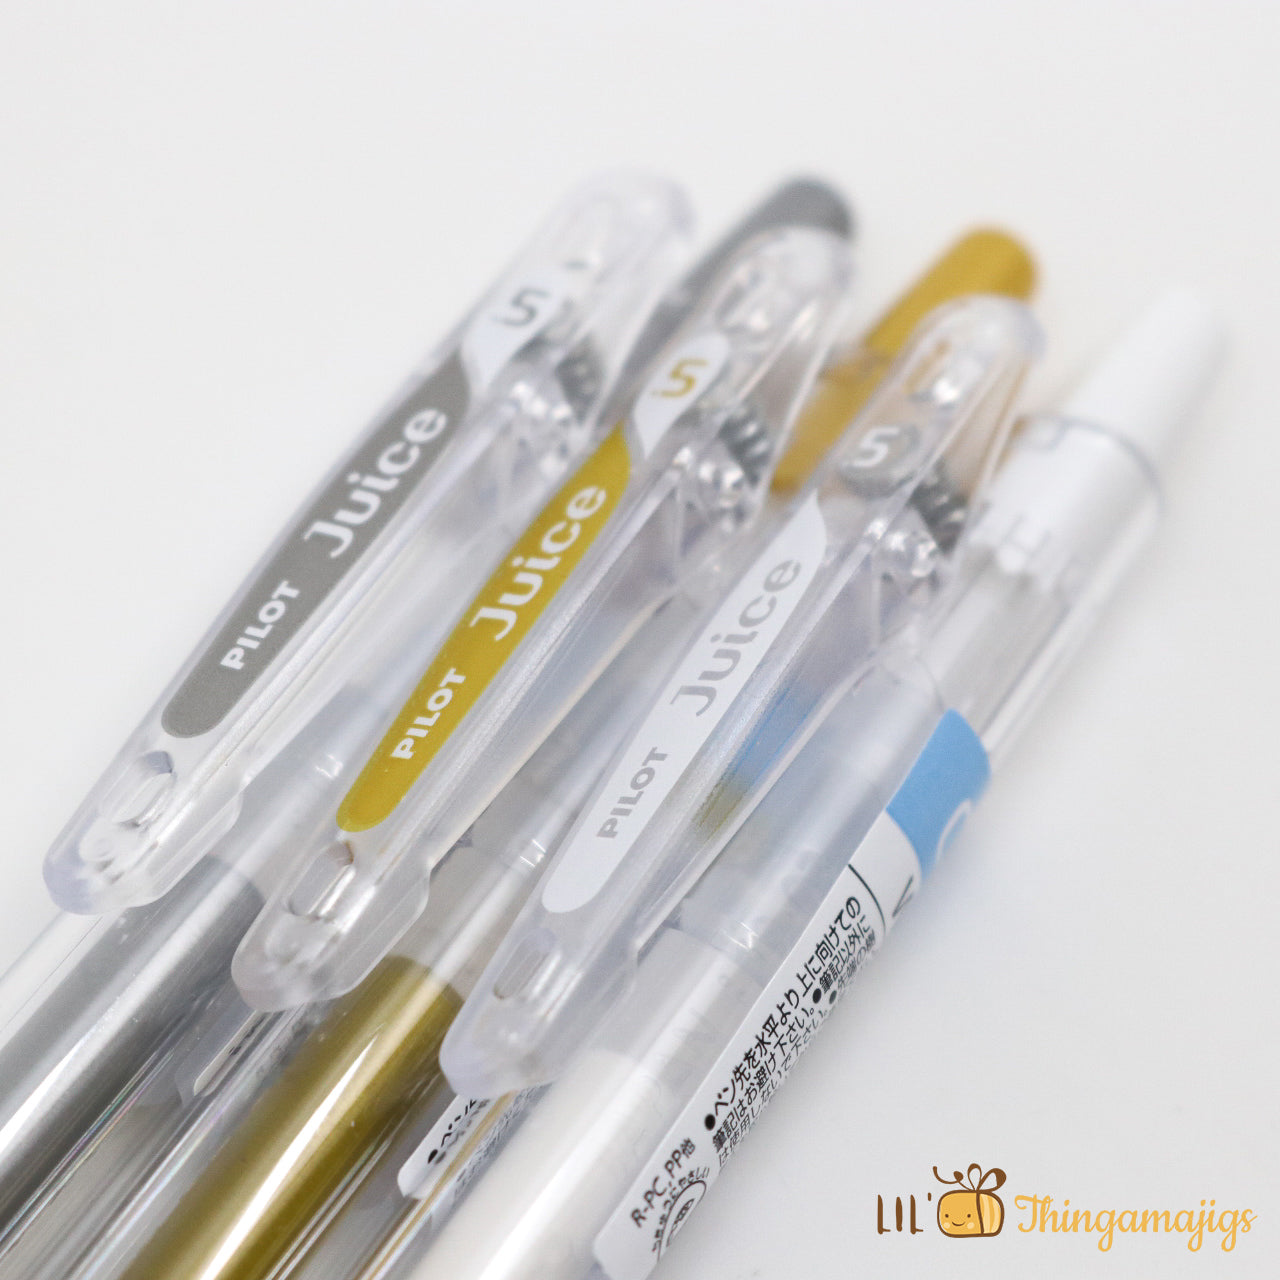 Lil Thingamajigs Online Shop - Pilot Frixion Gelpen - 0.5mm – Lil  Thingamajigs Hive